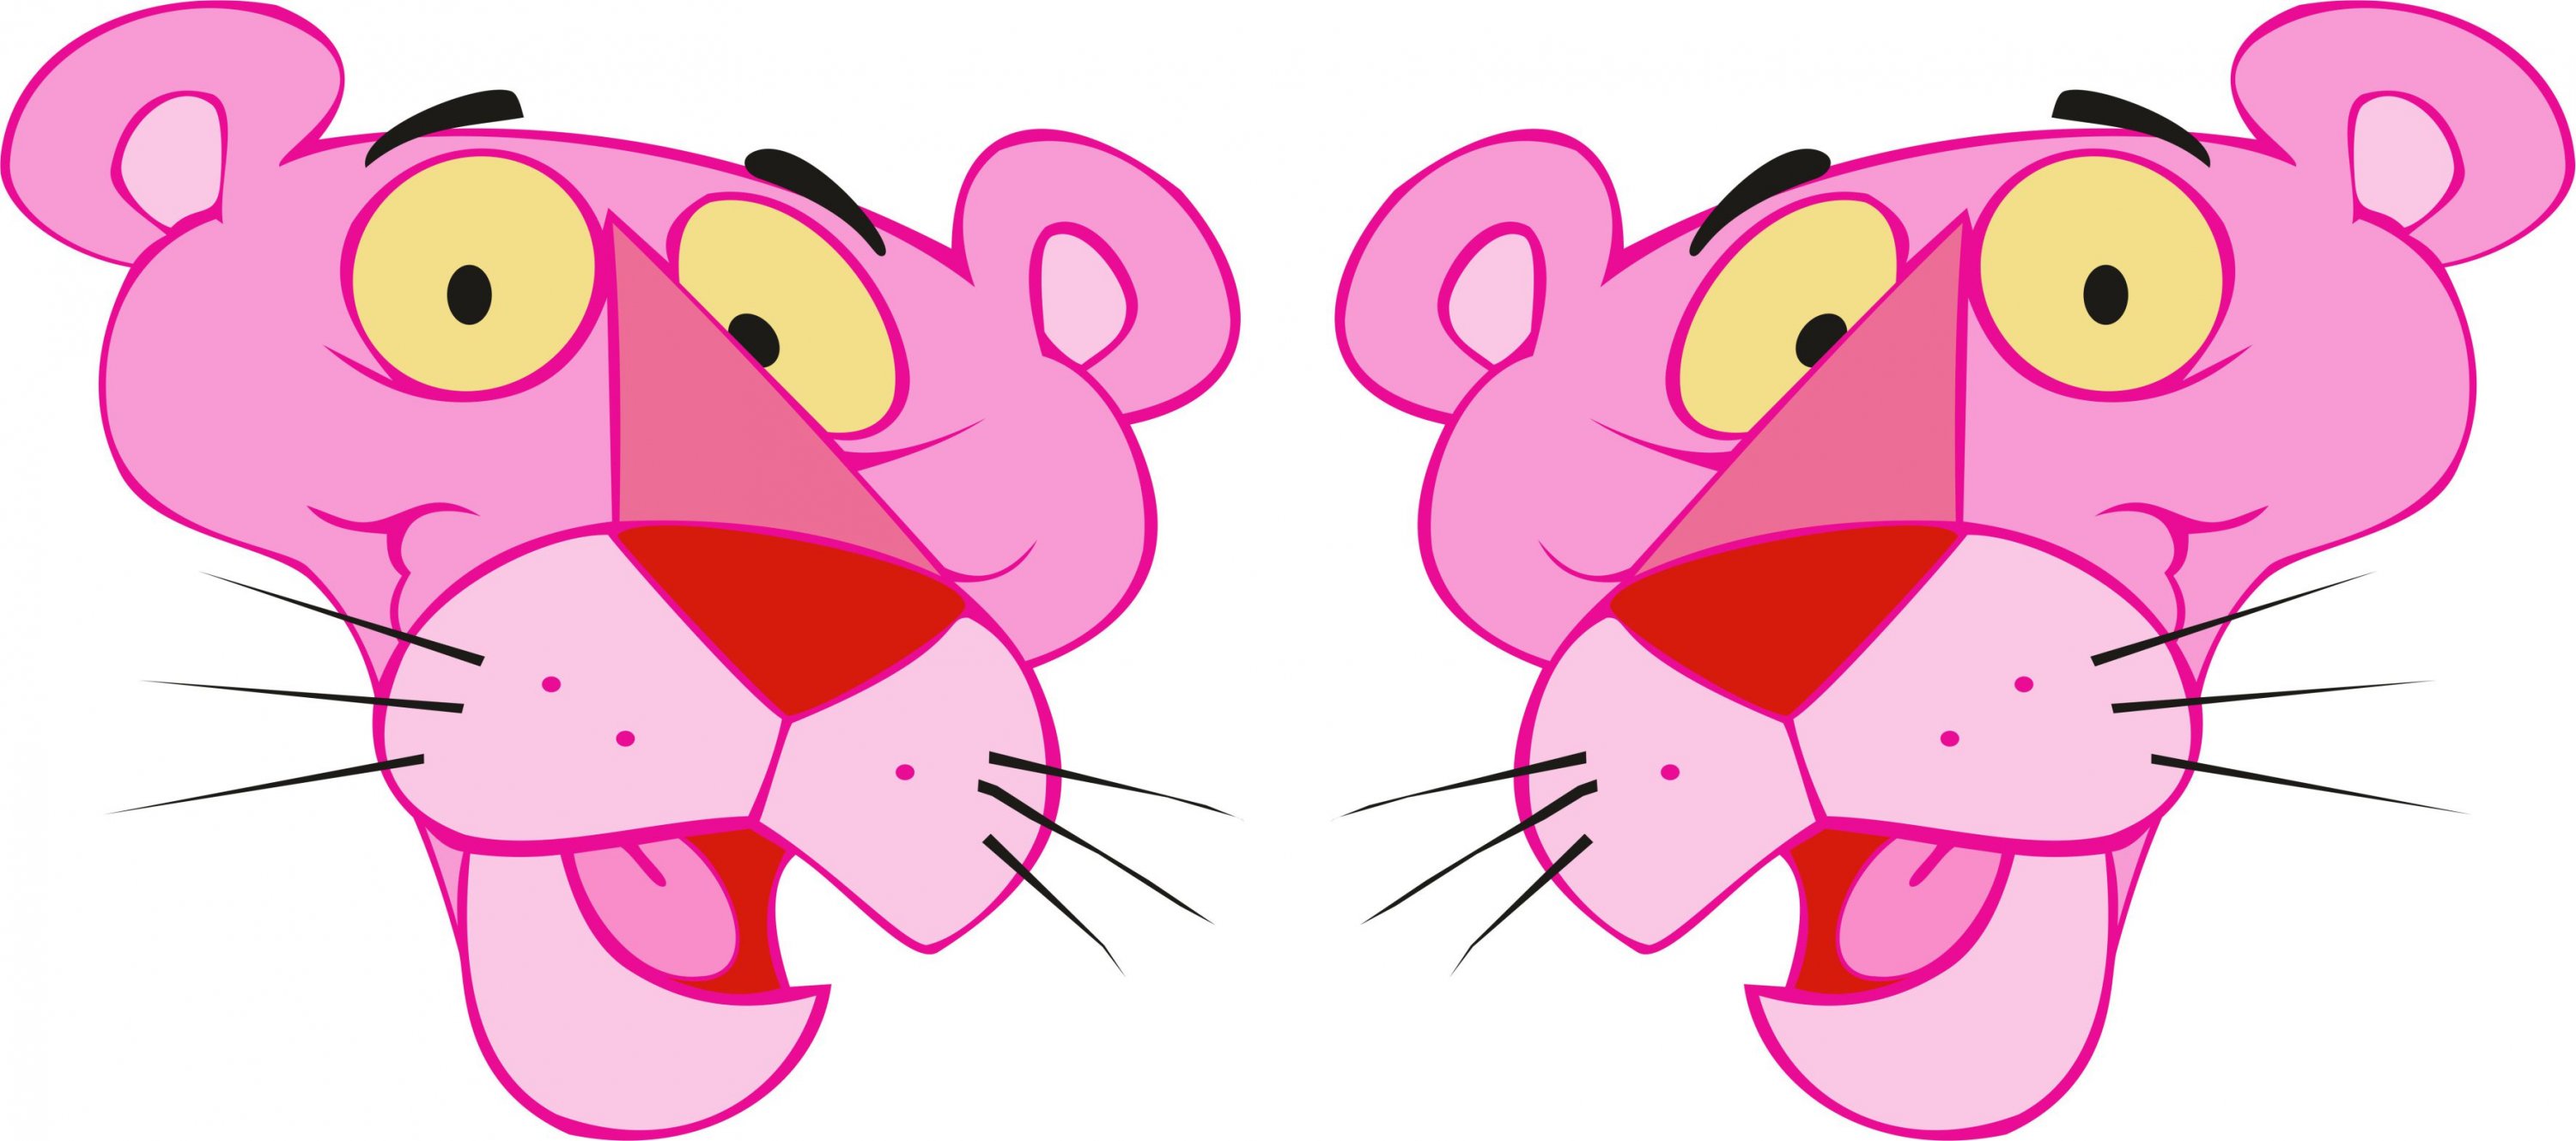 pink panther heads